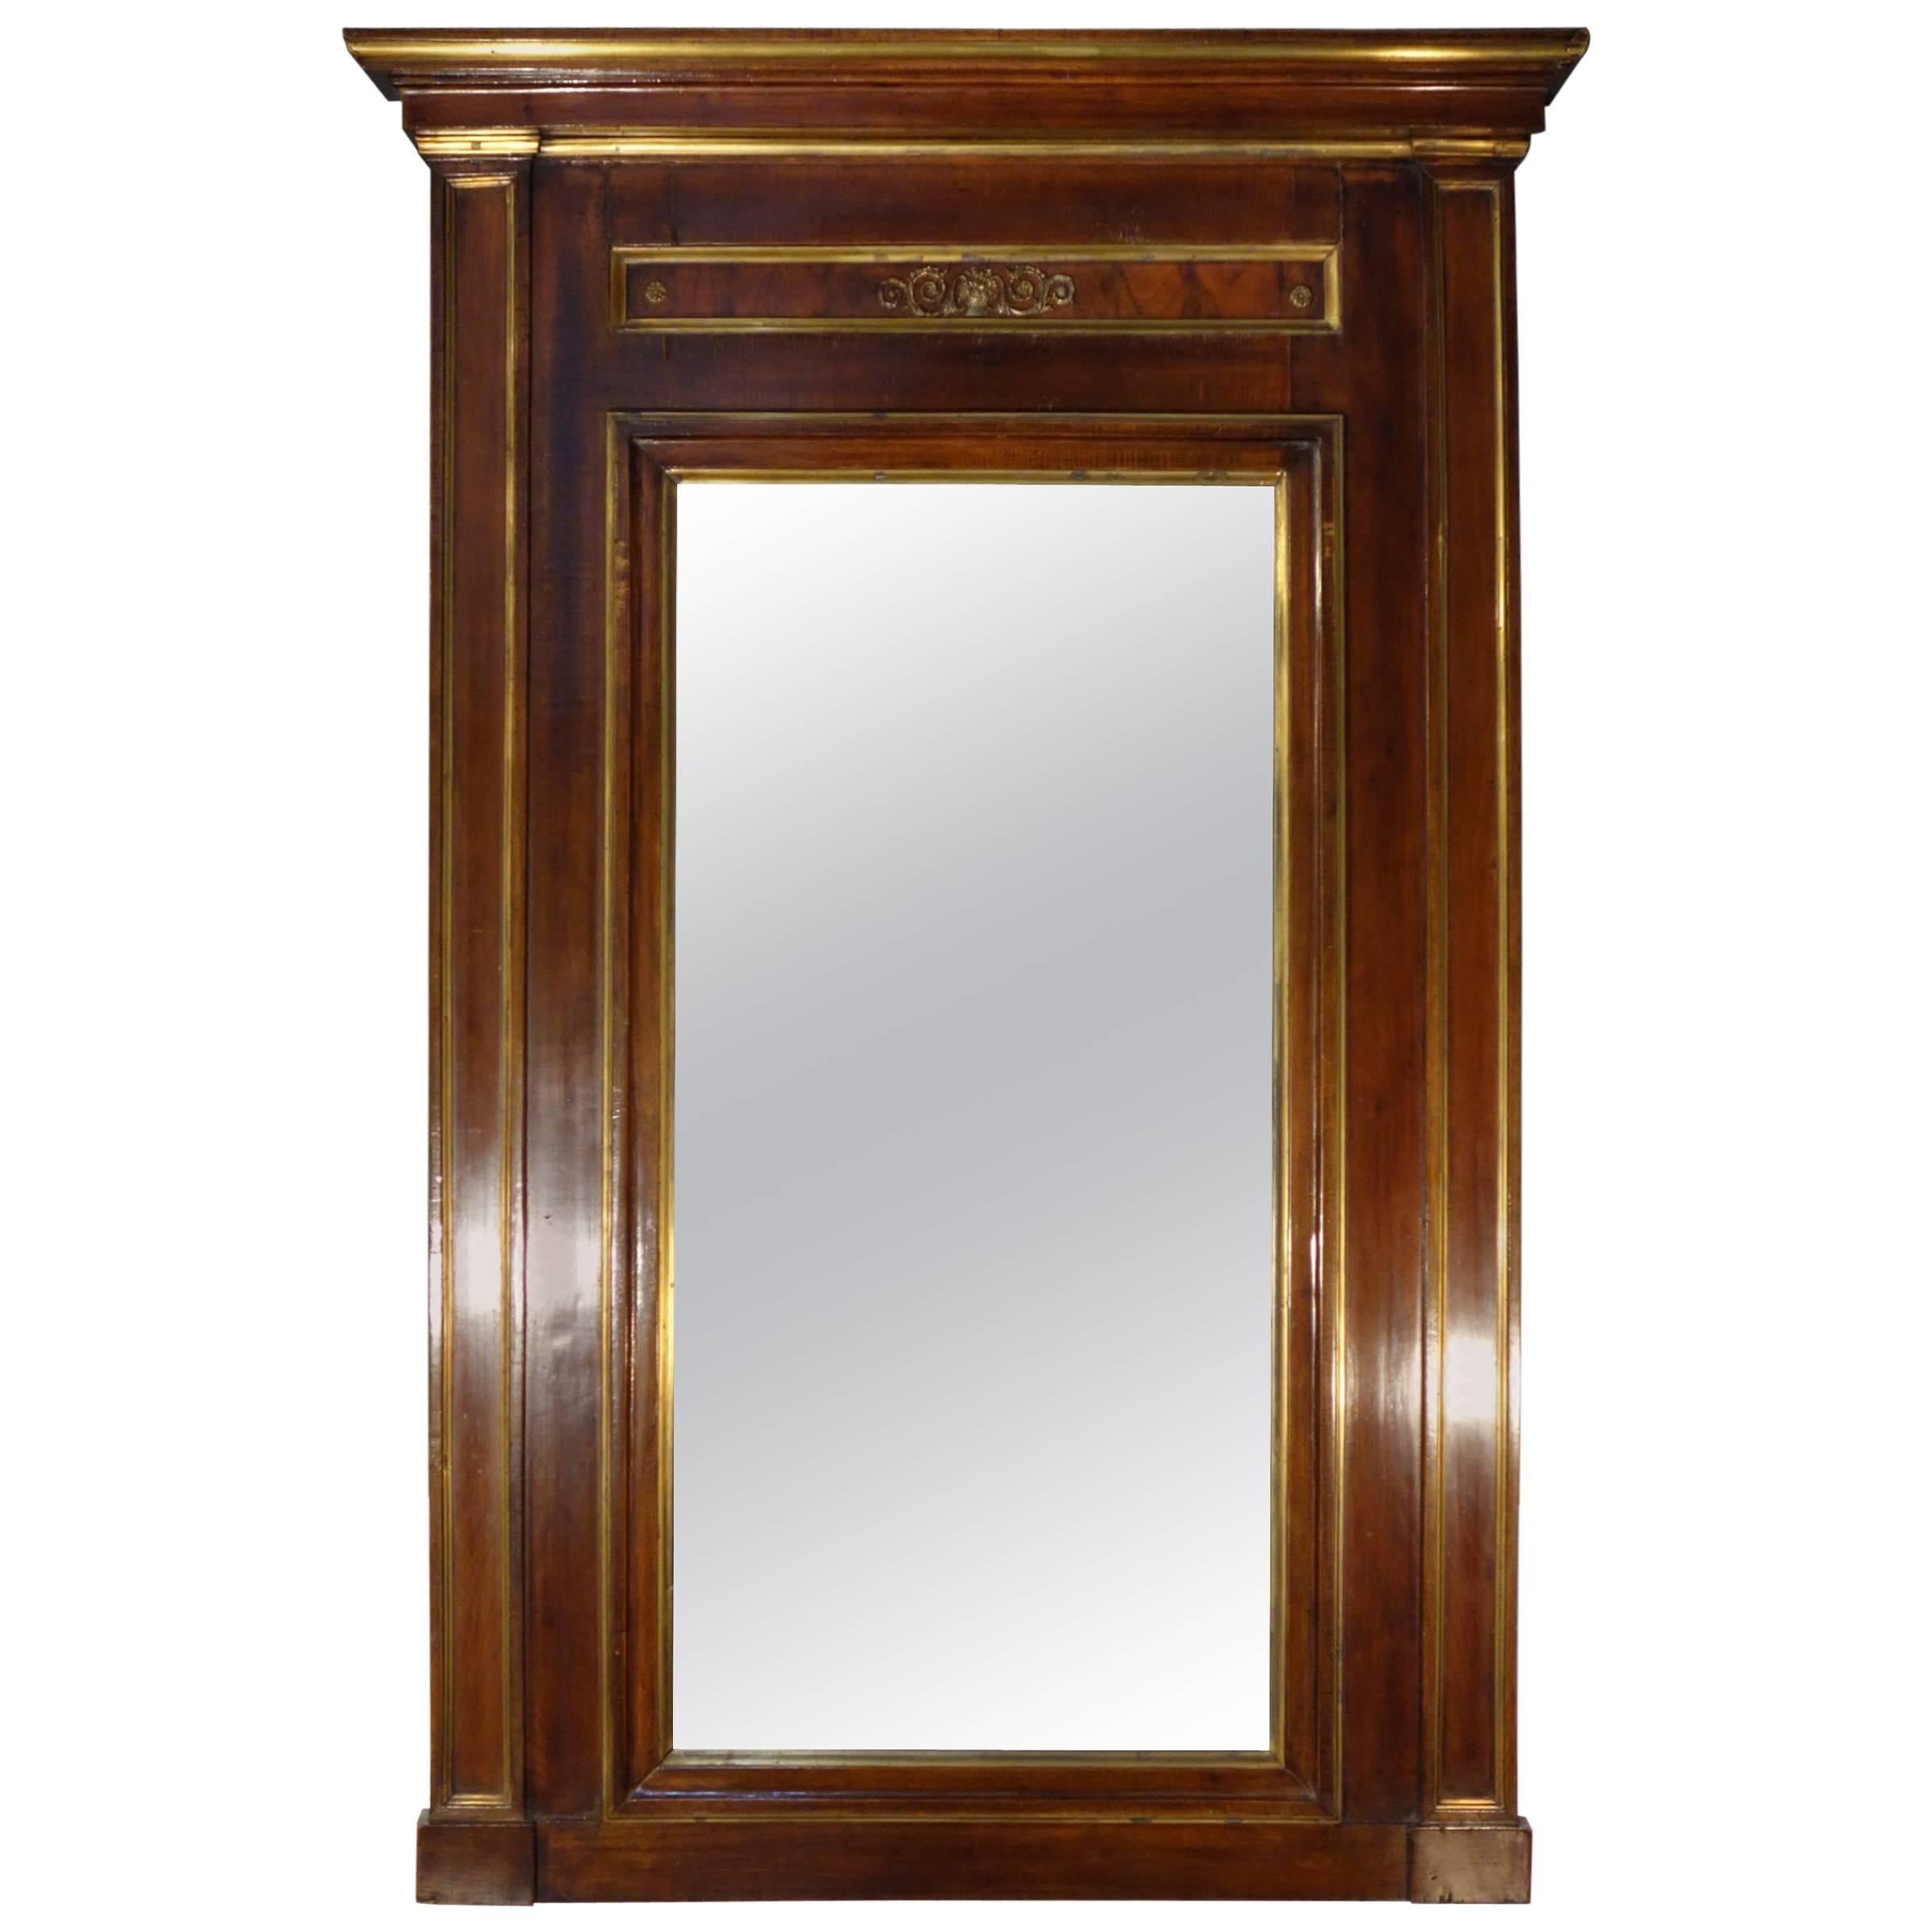 Early 19th Century Empire Framed Mirror Walnut with Gold Detail Circa 1820 For Sale